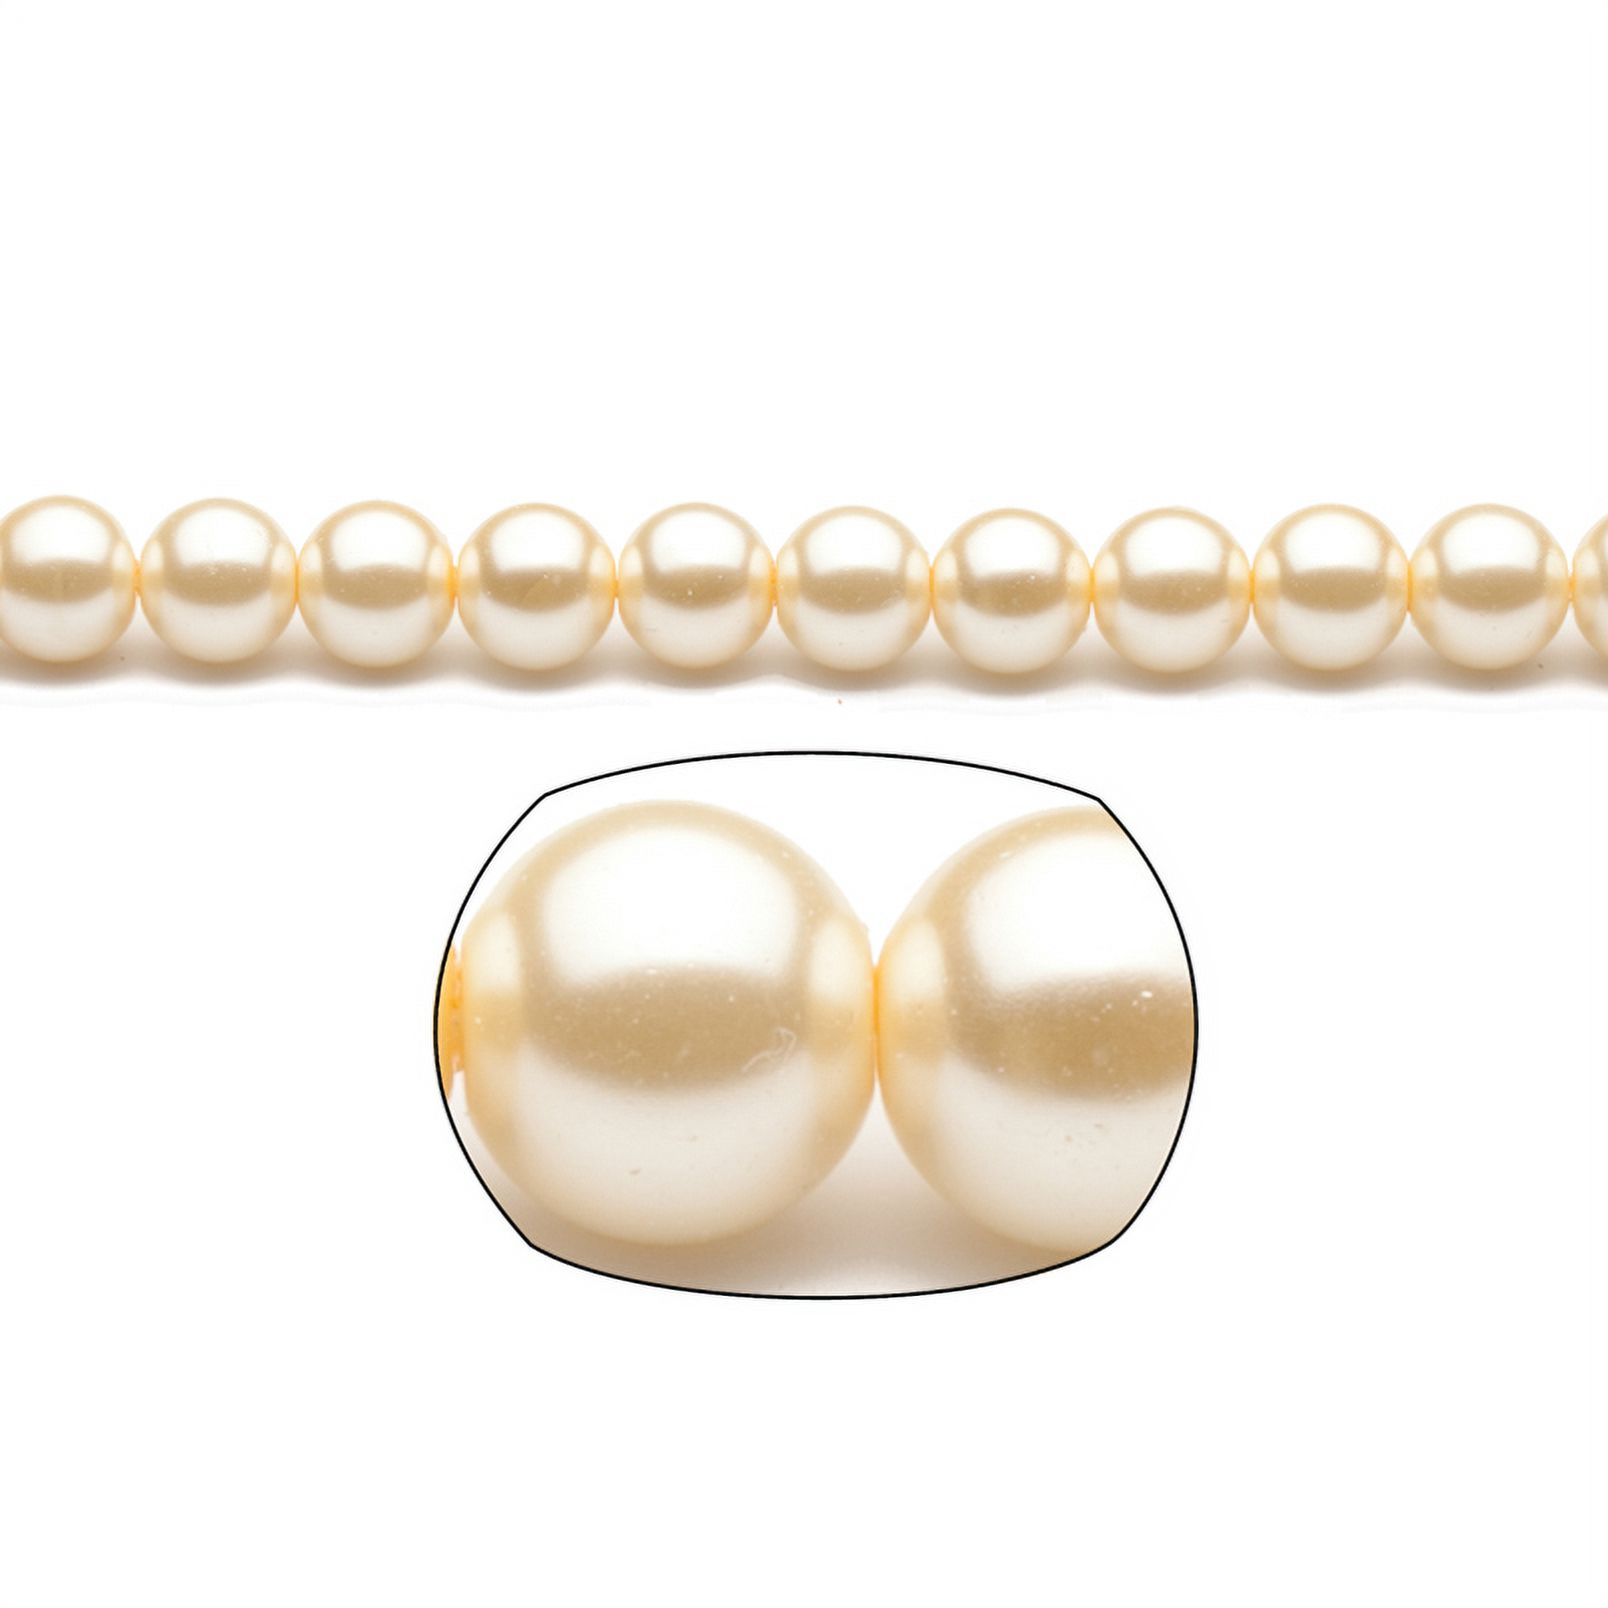 10mm Round Cream-Tone Champagne Glass Pearls 2x32Inch Stings /168-Bead Count - image 1 of 1